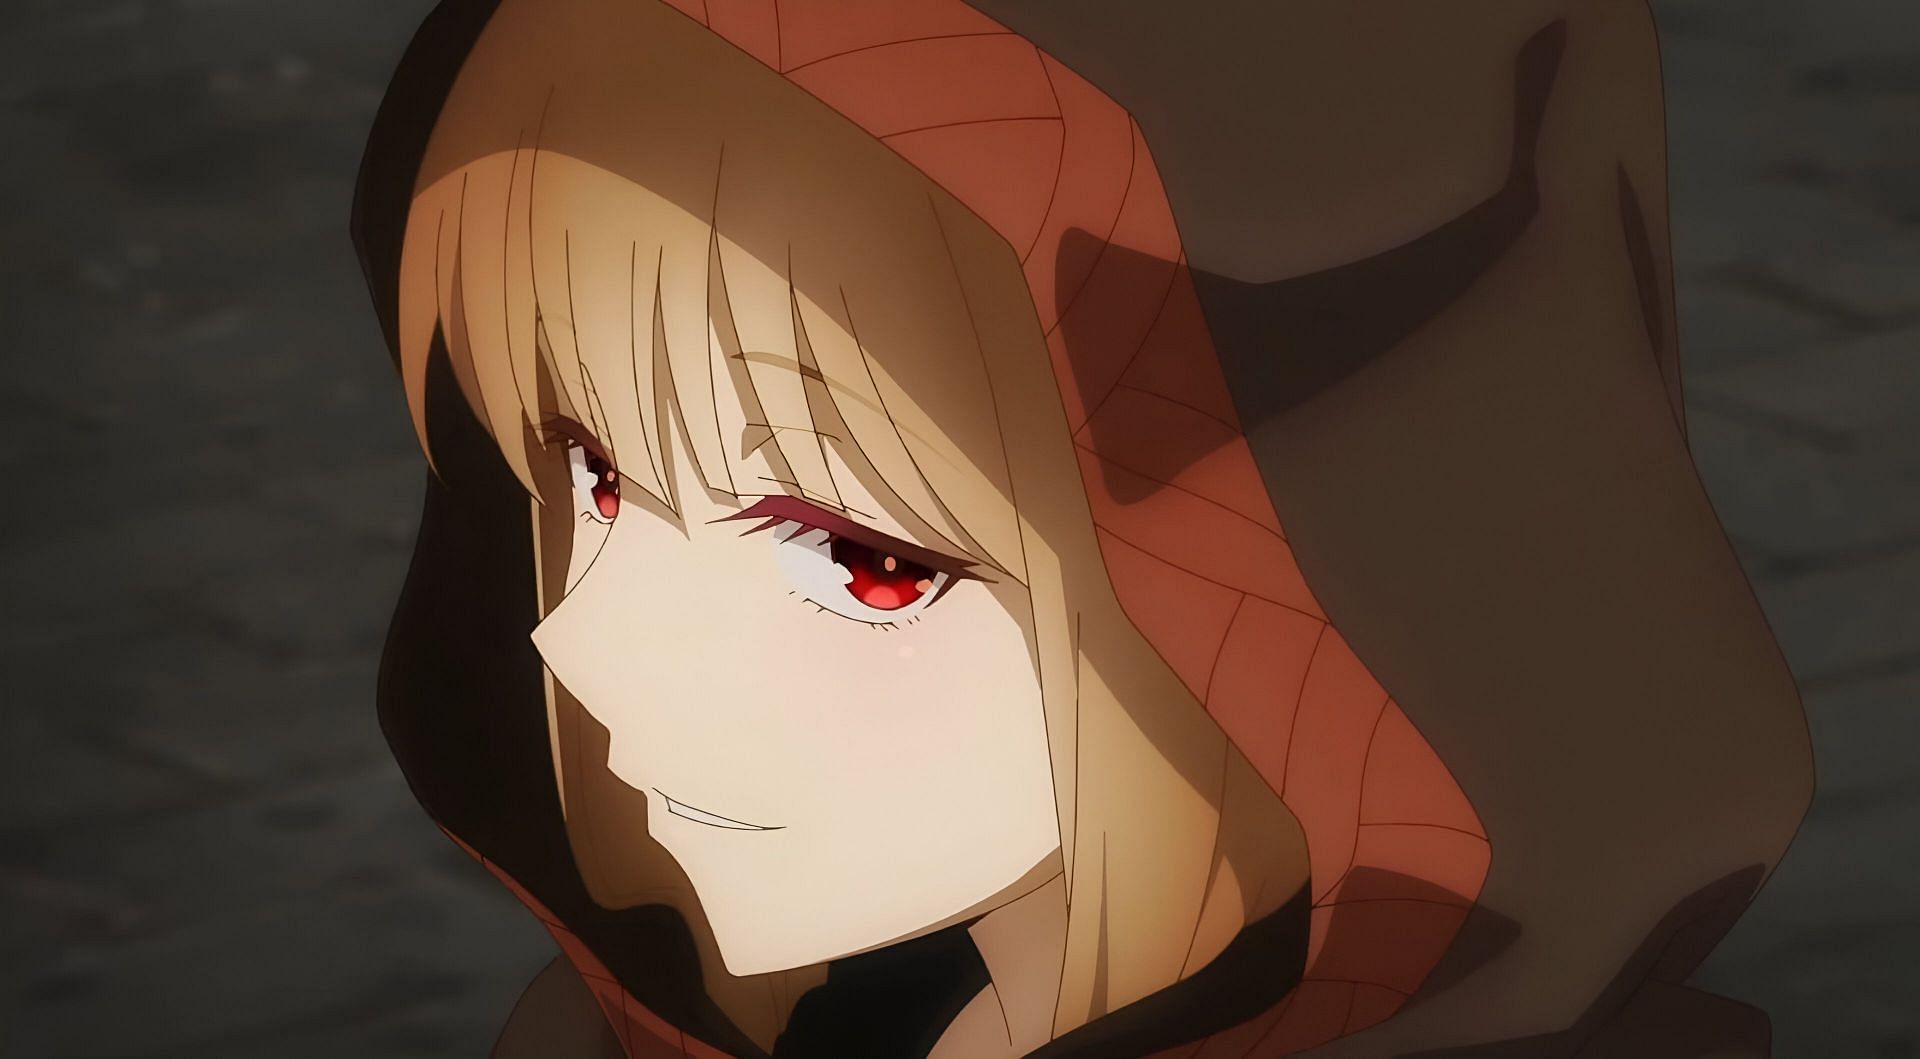 Holo, as seen in the new Spice and Wolf anime (Image via Studio Passione)